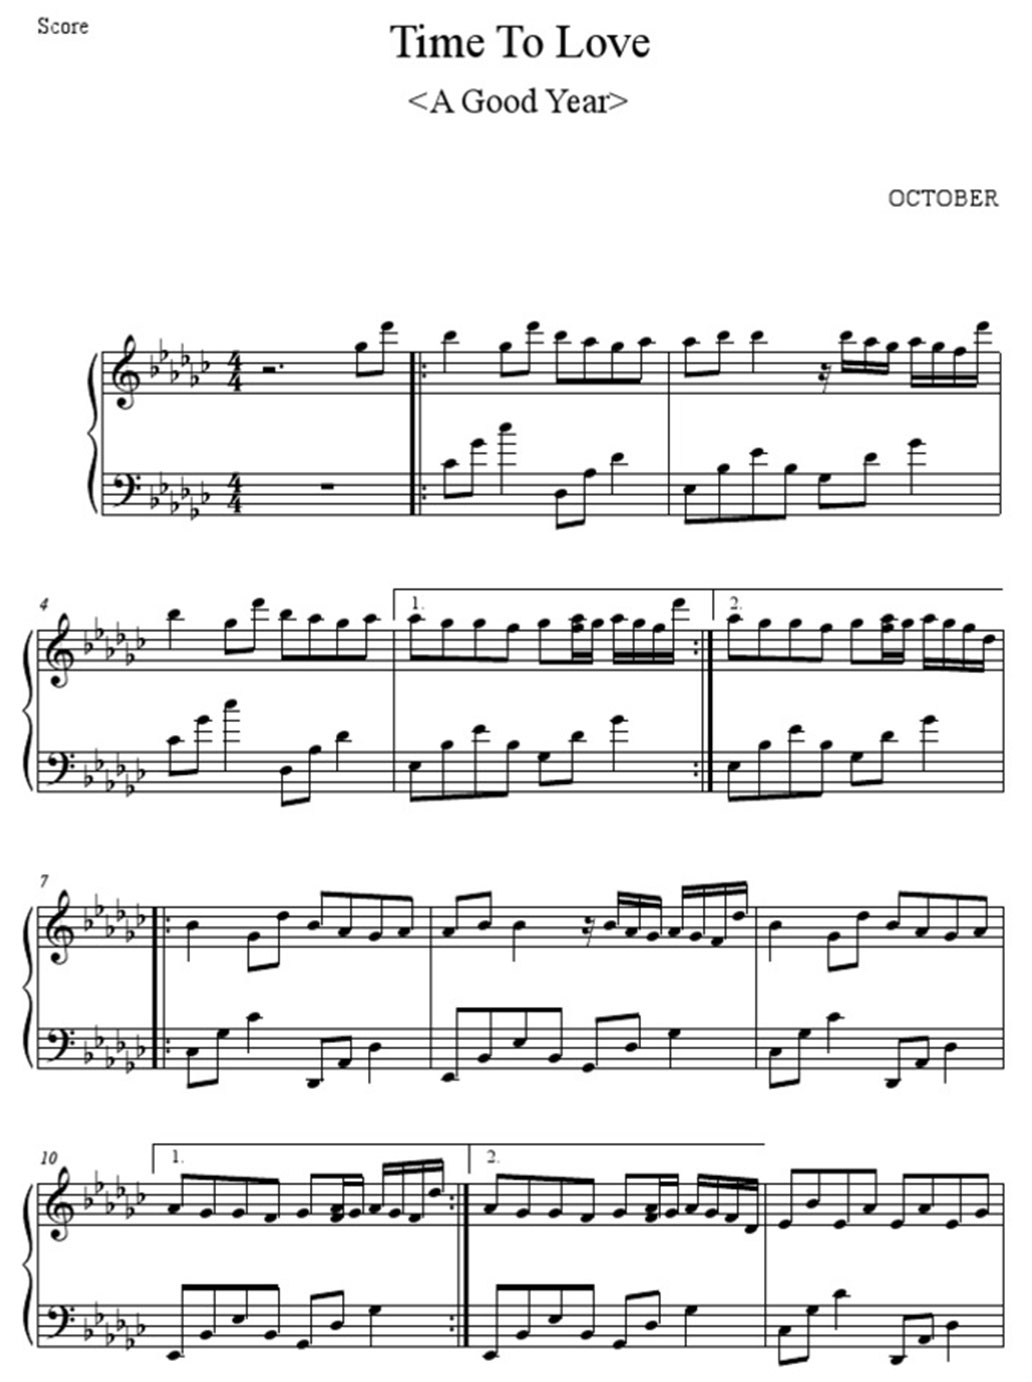 time to love sheet music notes